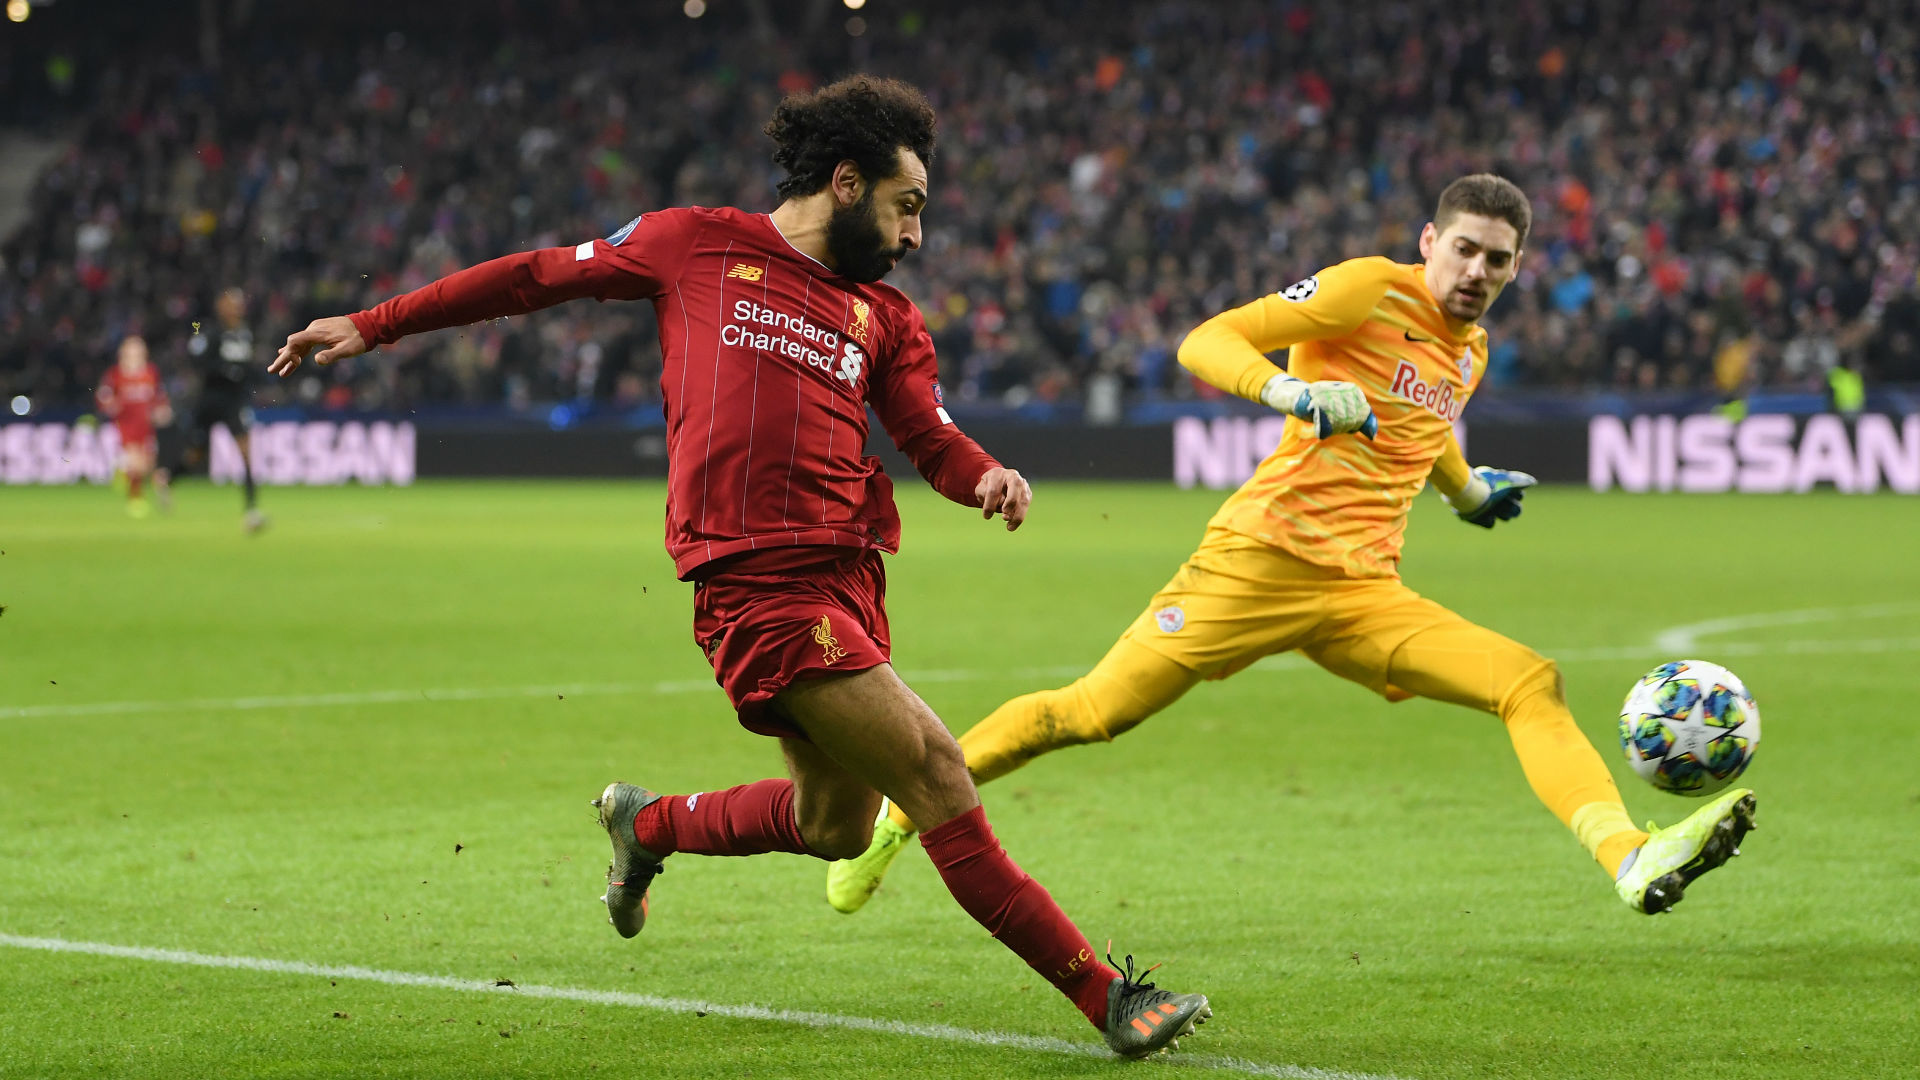 Salah’s stunner against Salzburg shortlisted for Champions League Goal of the Week